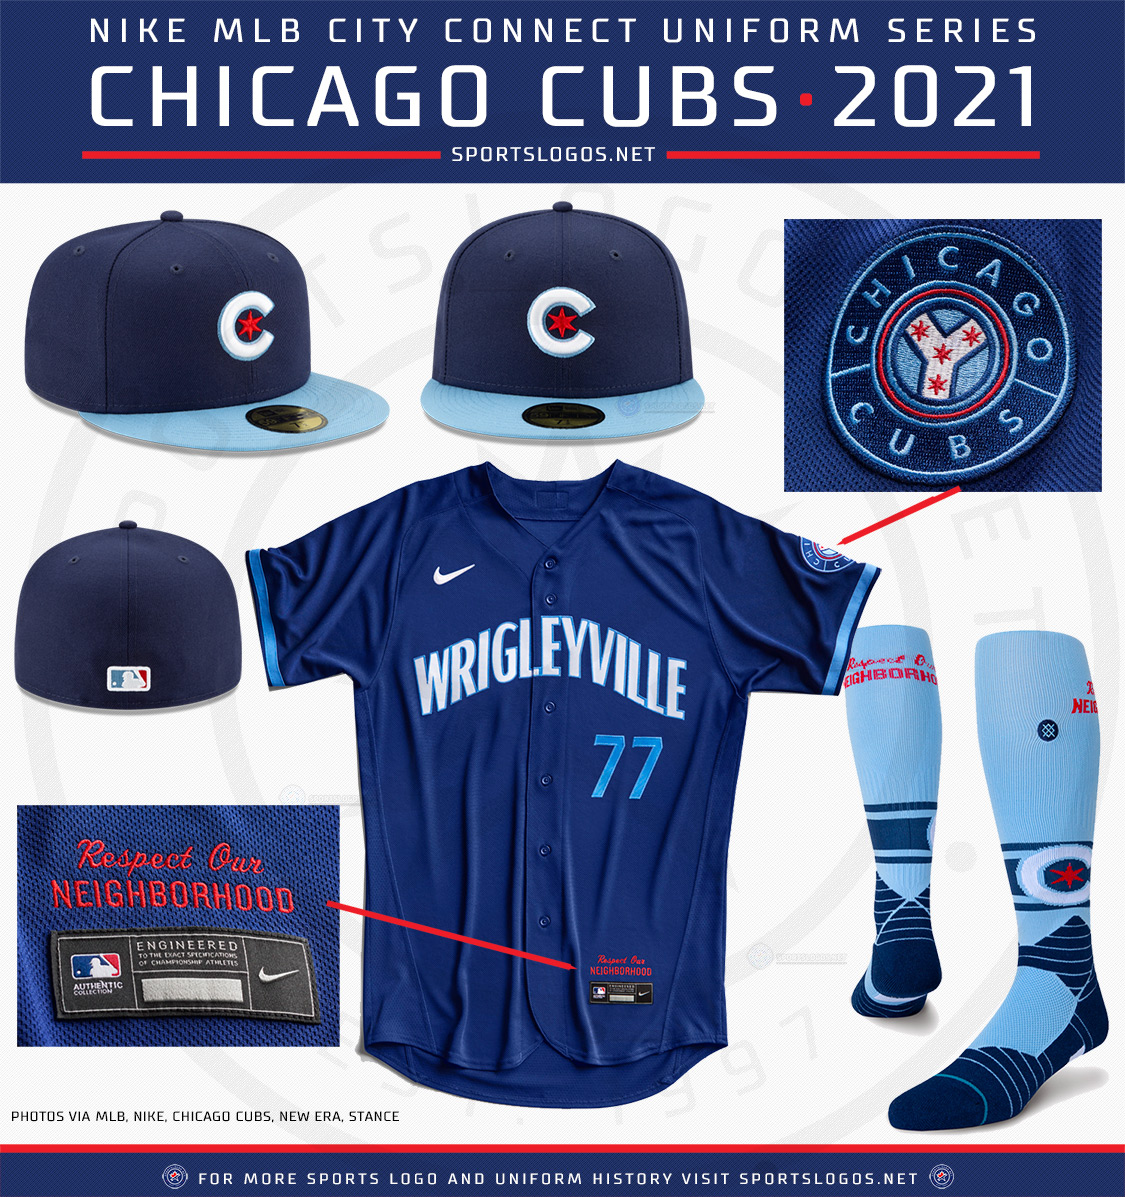 Chicago Cubs Reveal New ‘Wrigleyville’ 2022 Nike City Connect Uniforms